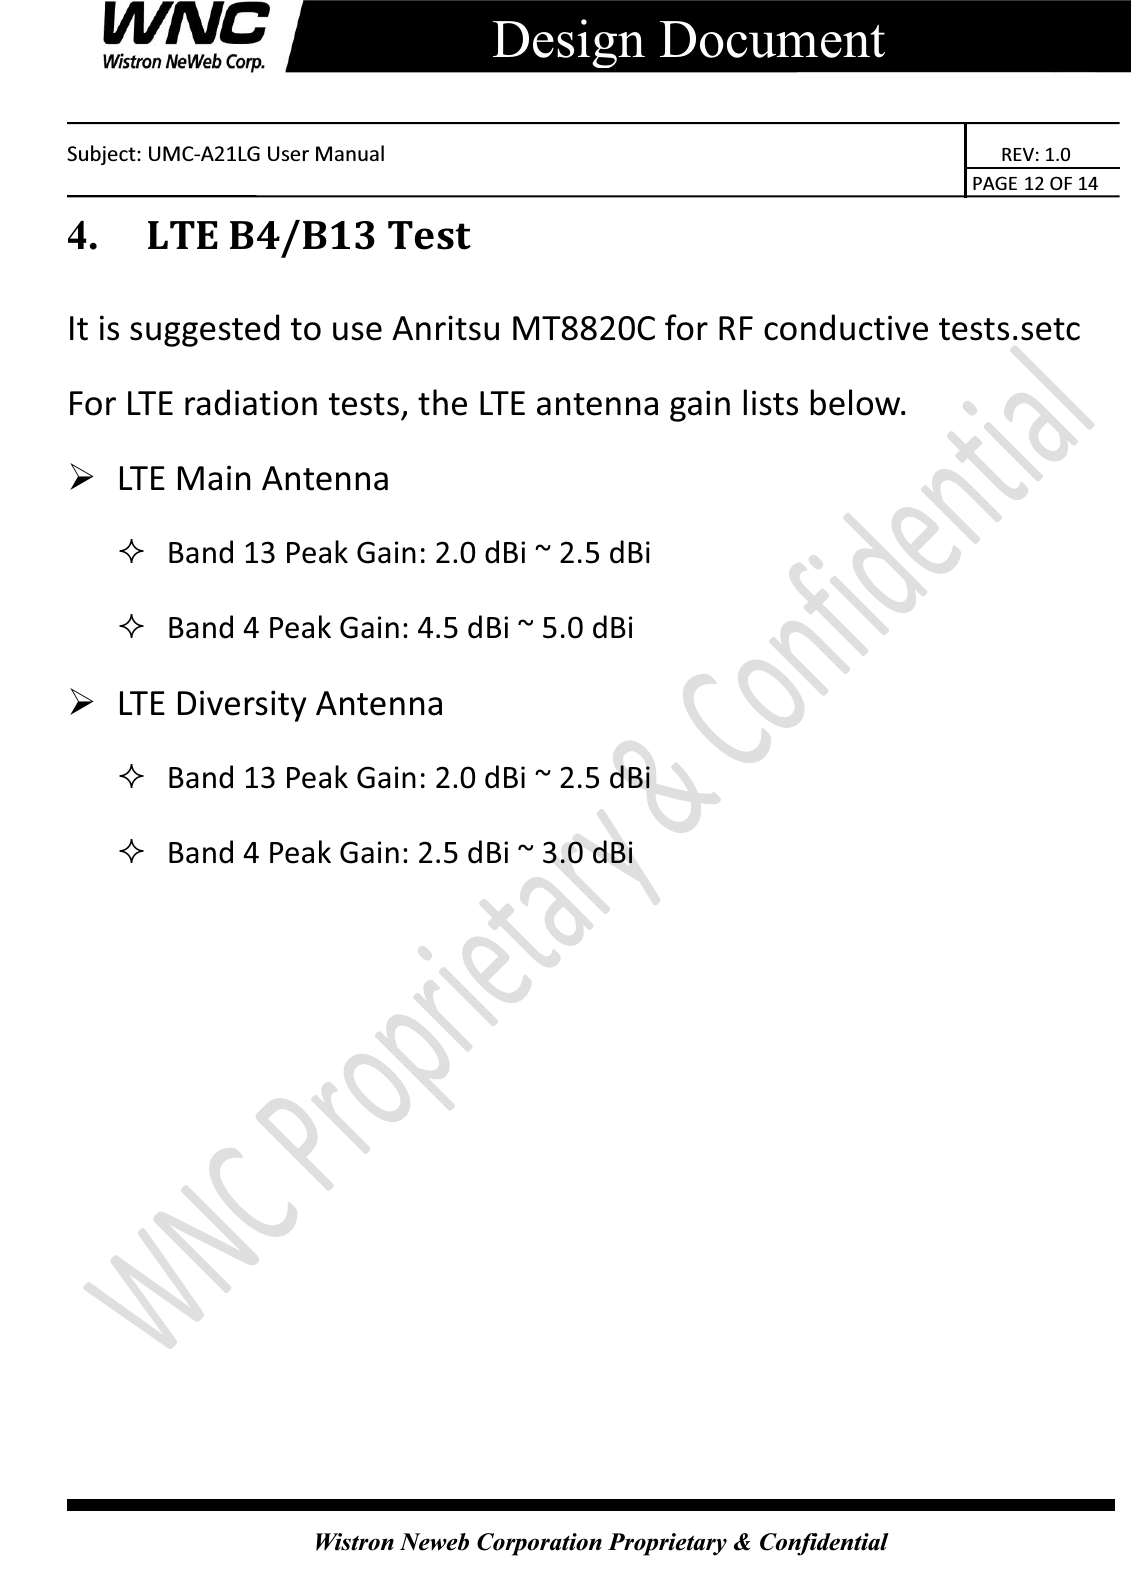    Subject: UMC-A21LG User Manual                                                          REV: 1.0                                                                                        PAGE 12 OF 14  Wistron Neweb Corporation Proprietary &amp; Confidential     Design Document 4.   LTE B4/B13 Test It is suggested to use Anritsu MT8820C for RF conductive tests.setc For LTE radiation tests, the LTE antenna gain lists below. ¾ LTE Main Antenna    Band 13 Peak Gain: 2.0 dBi ~ 2.5 dBi    Band 4 Peak Gain: 4.5 dBi ~ 5.0 dBi   ¾ LTE Diversity Antenna    Band 13 Peak Gain: 2.0 dBi ~ 2.5 dBi    Band 4 Peak Gain: 2.5 dBi ~ 3.0 dBi   